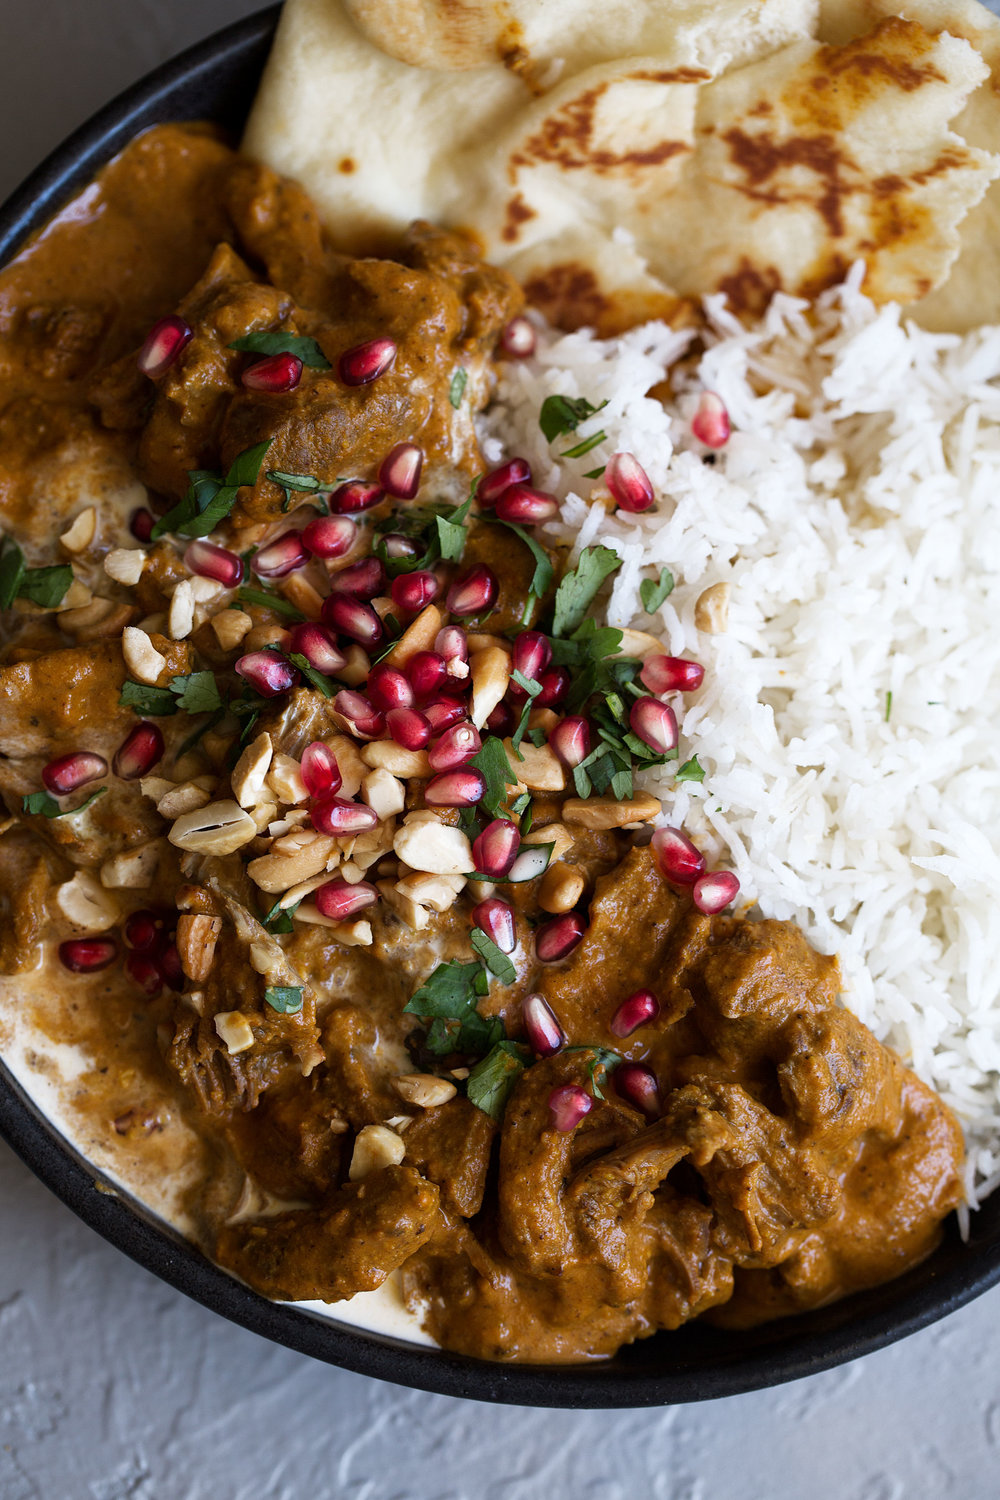 lamb korma recipe over white rice with naan bread garnished with cilantro pomegranate seeds and nuts